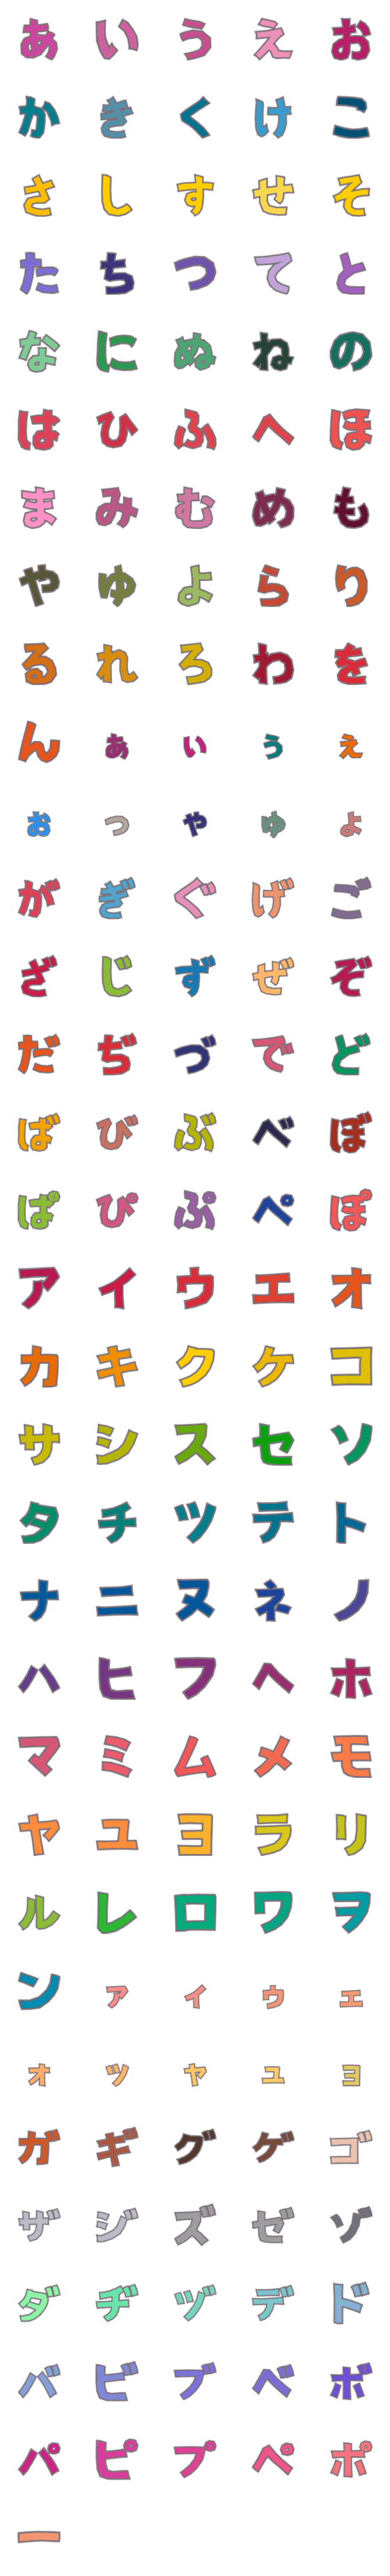 [LINE絵文字]colorfulデコ文字の画像一覧